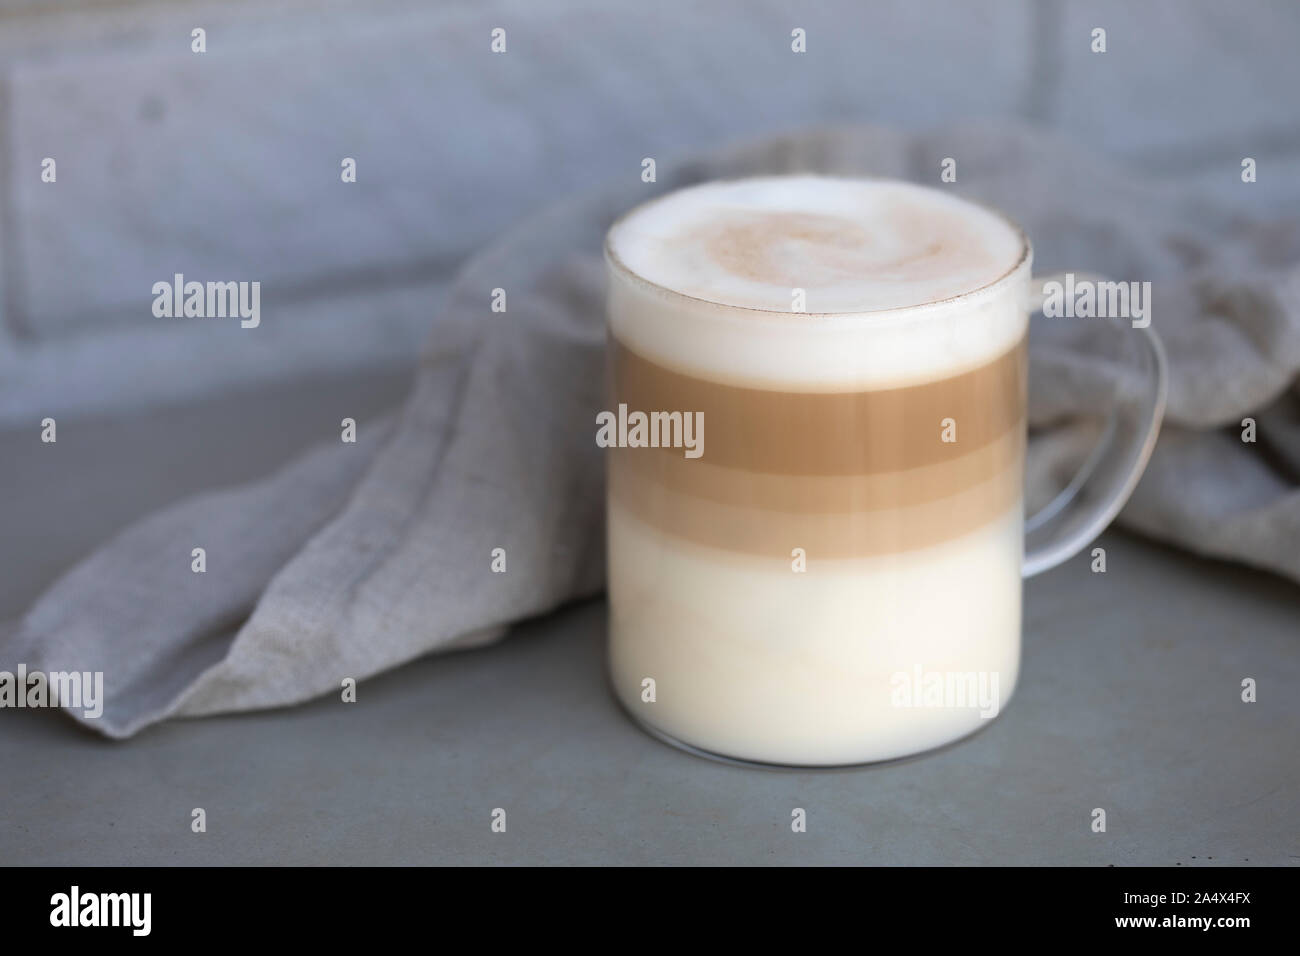 Coffee Latte macchiato outdoors in a seethrough glass cup. The cup is on a rustic concrete table with a gray background. Room for text in the photo. Stock Photo